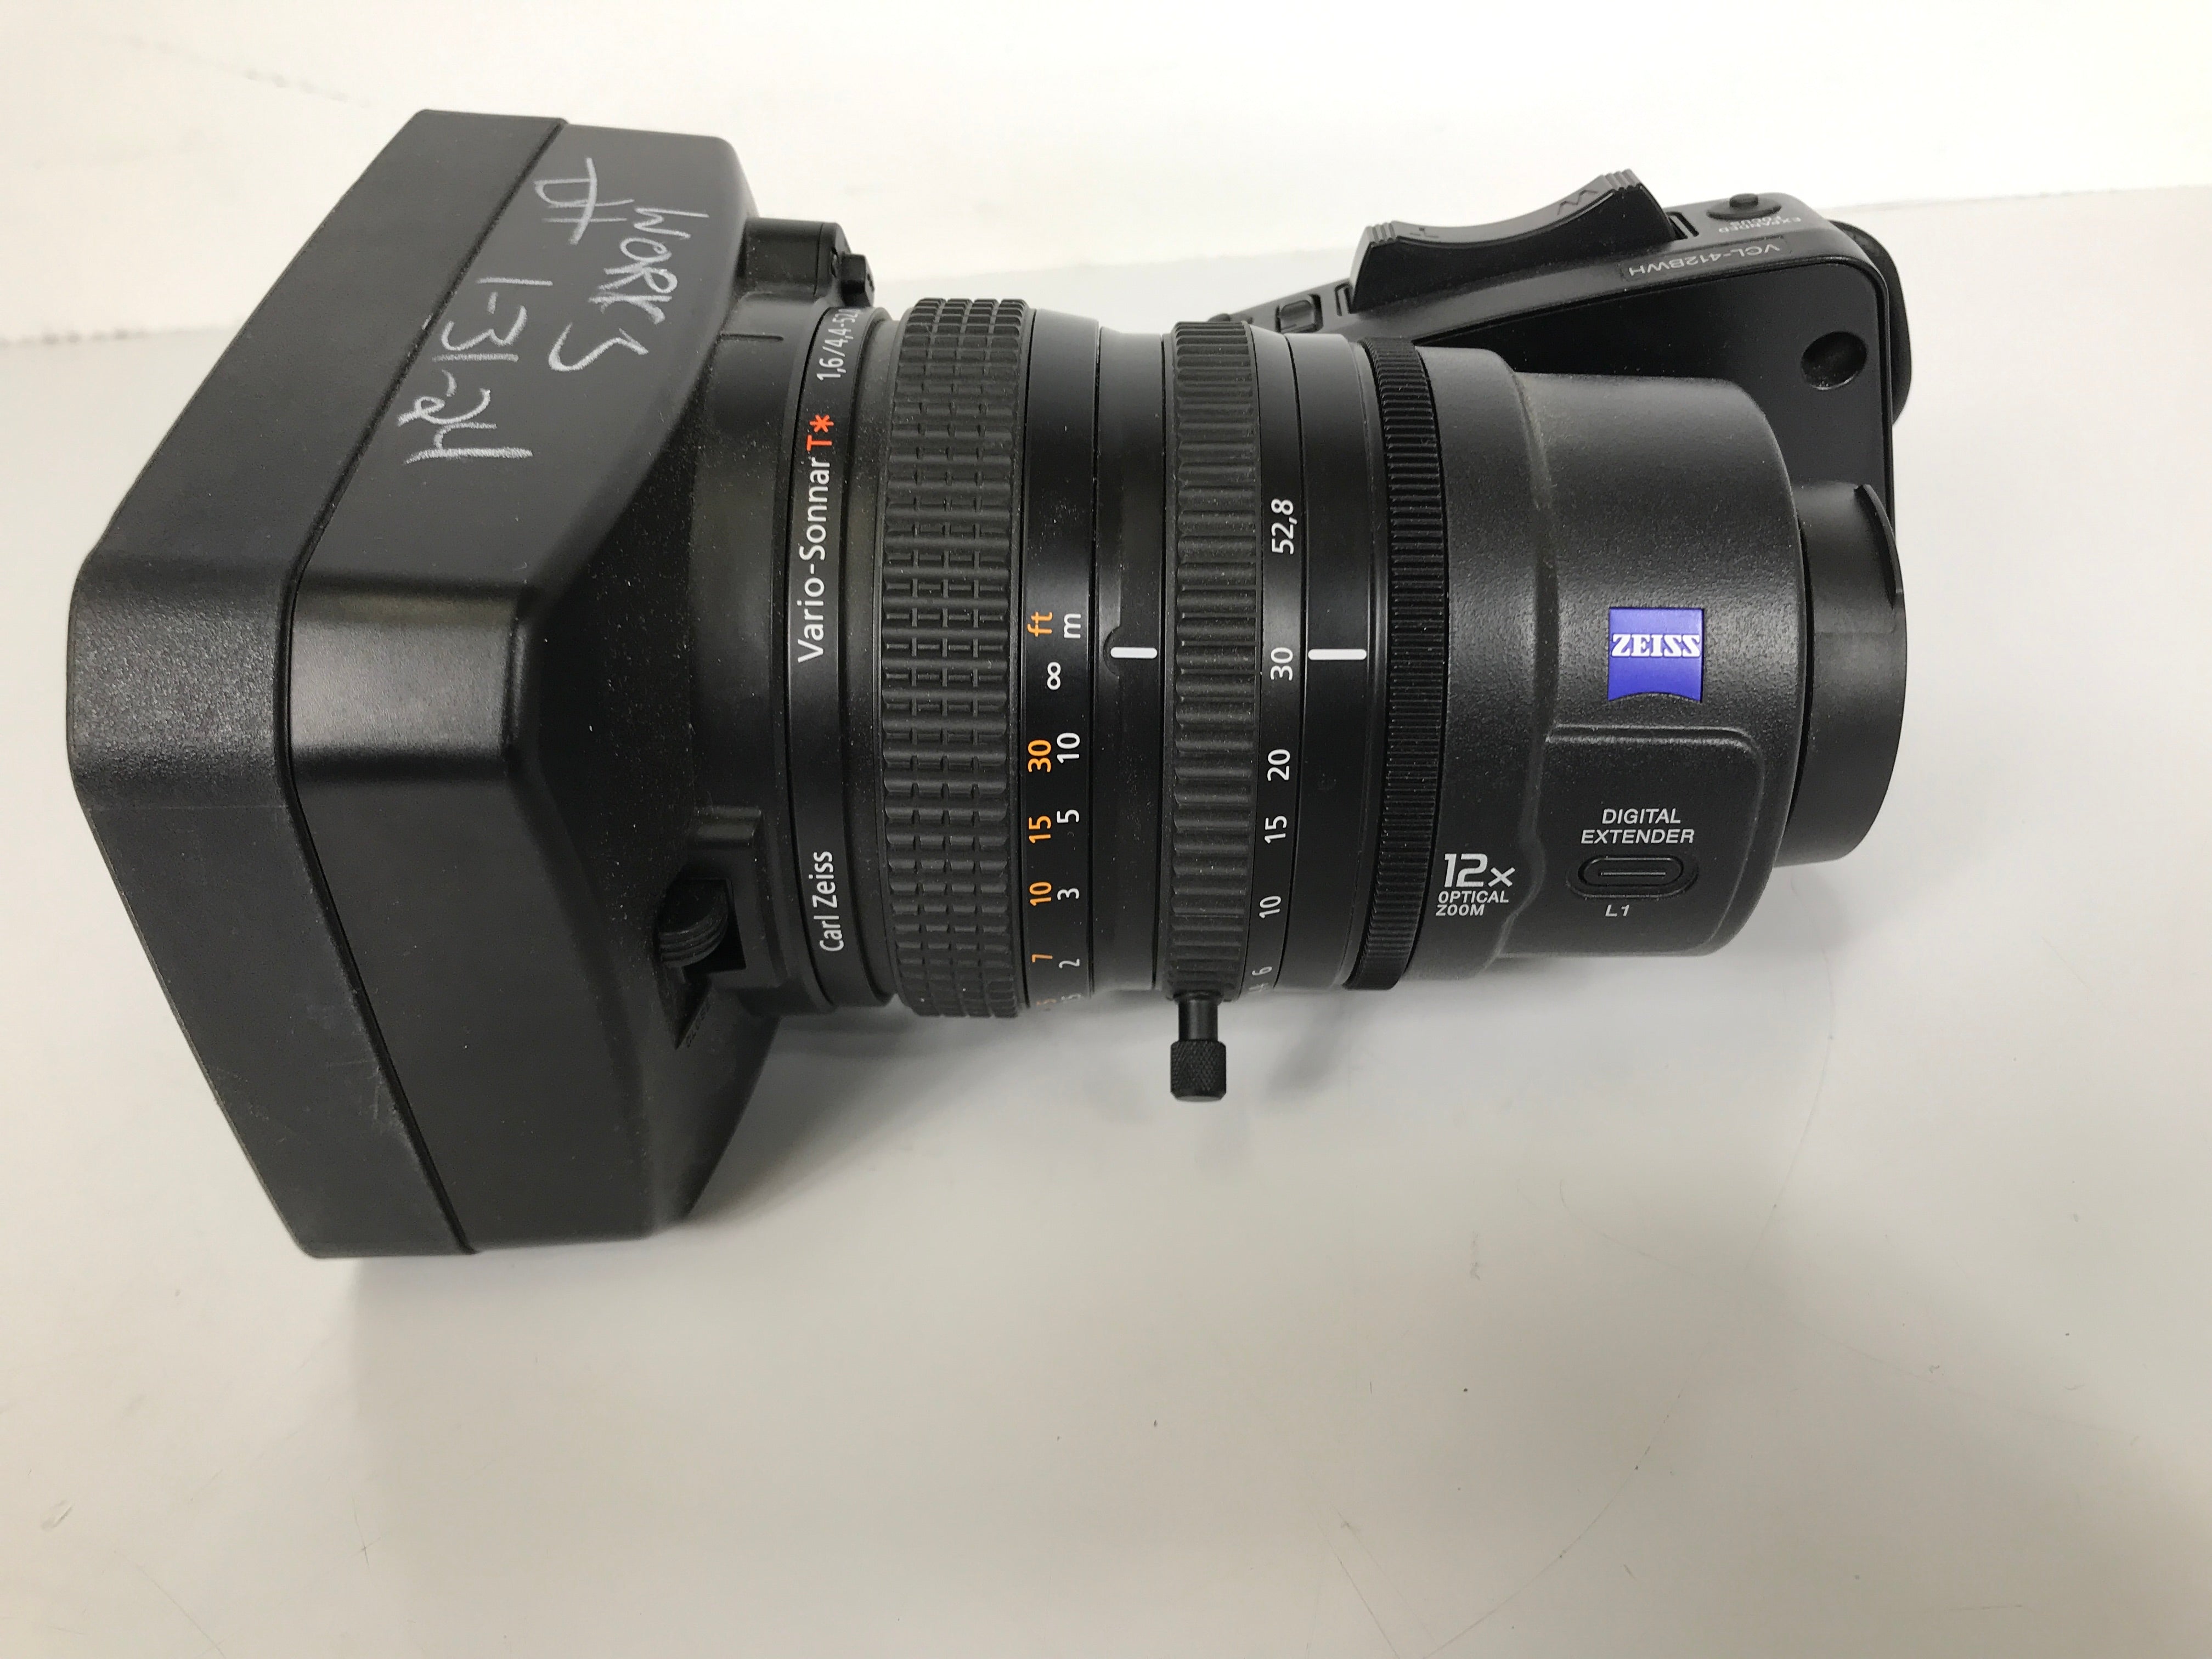 Sony Carl Zeiss VCL-412BWH 12x Optical Zoom Lens